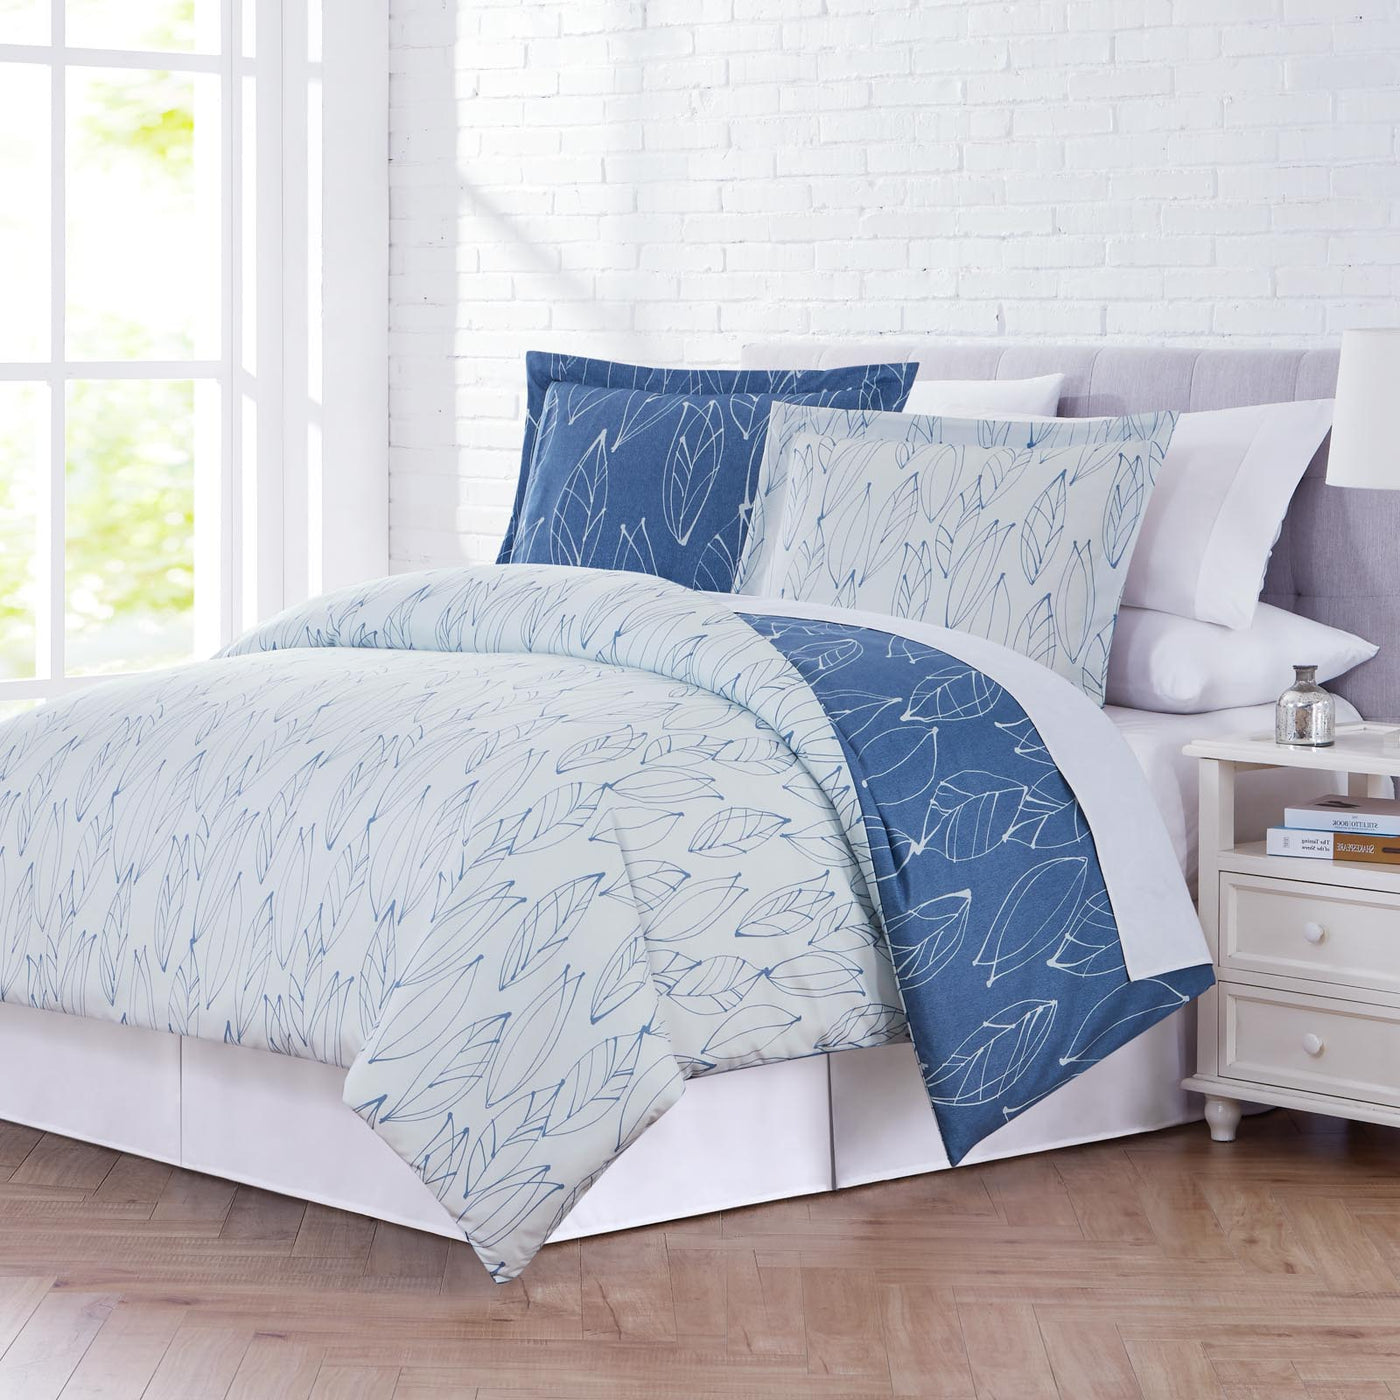 Contemporary Leaves Duvet Cover Set in Blue